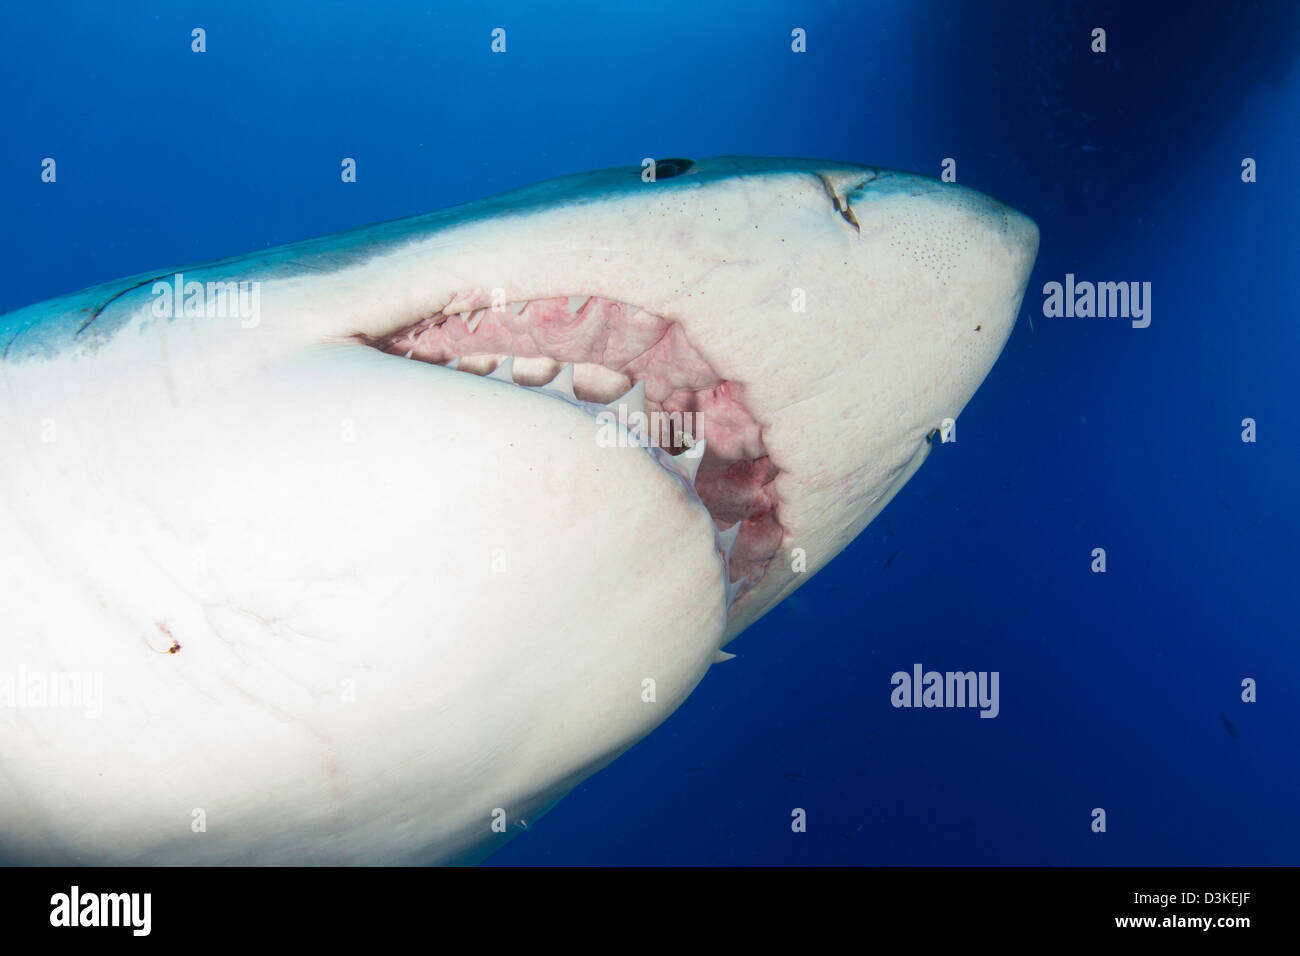 Male great white shark showing teeth, Guadalupe Island, Mexico. Stock Photo